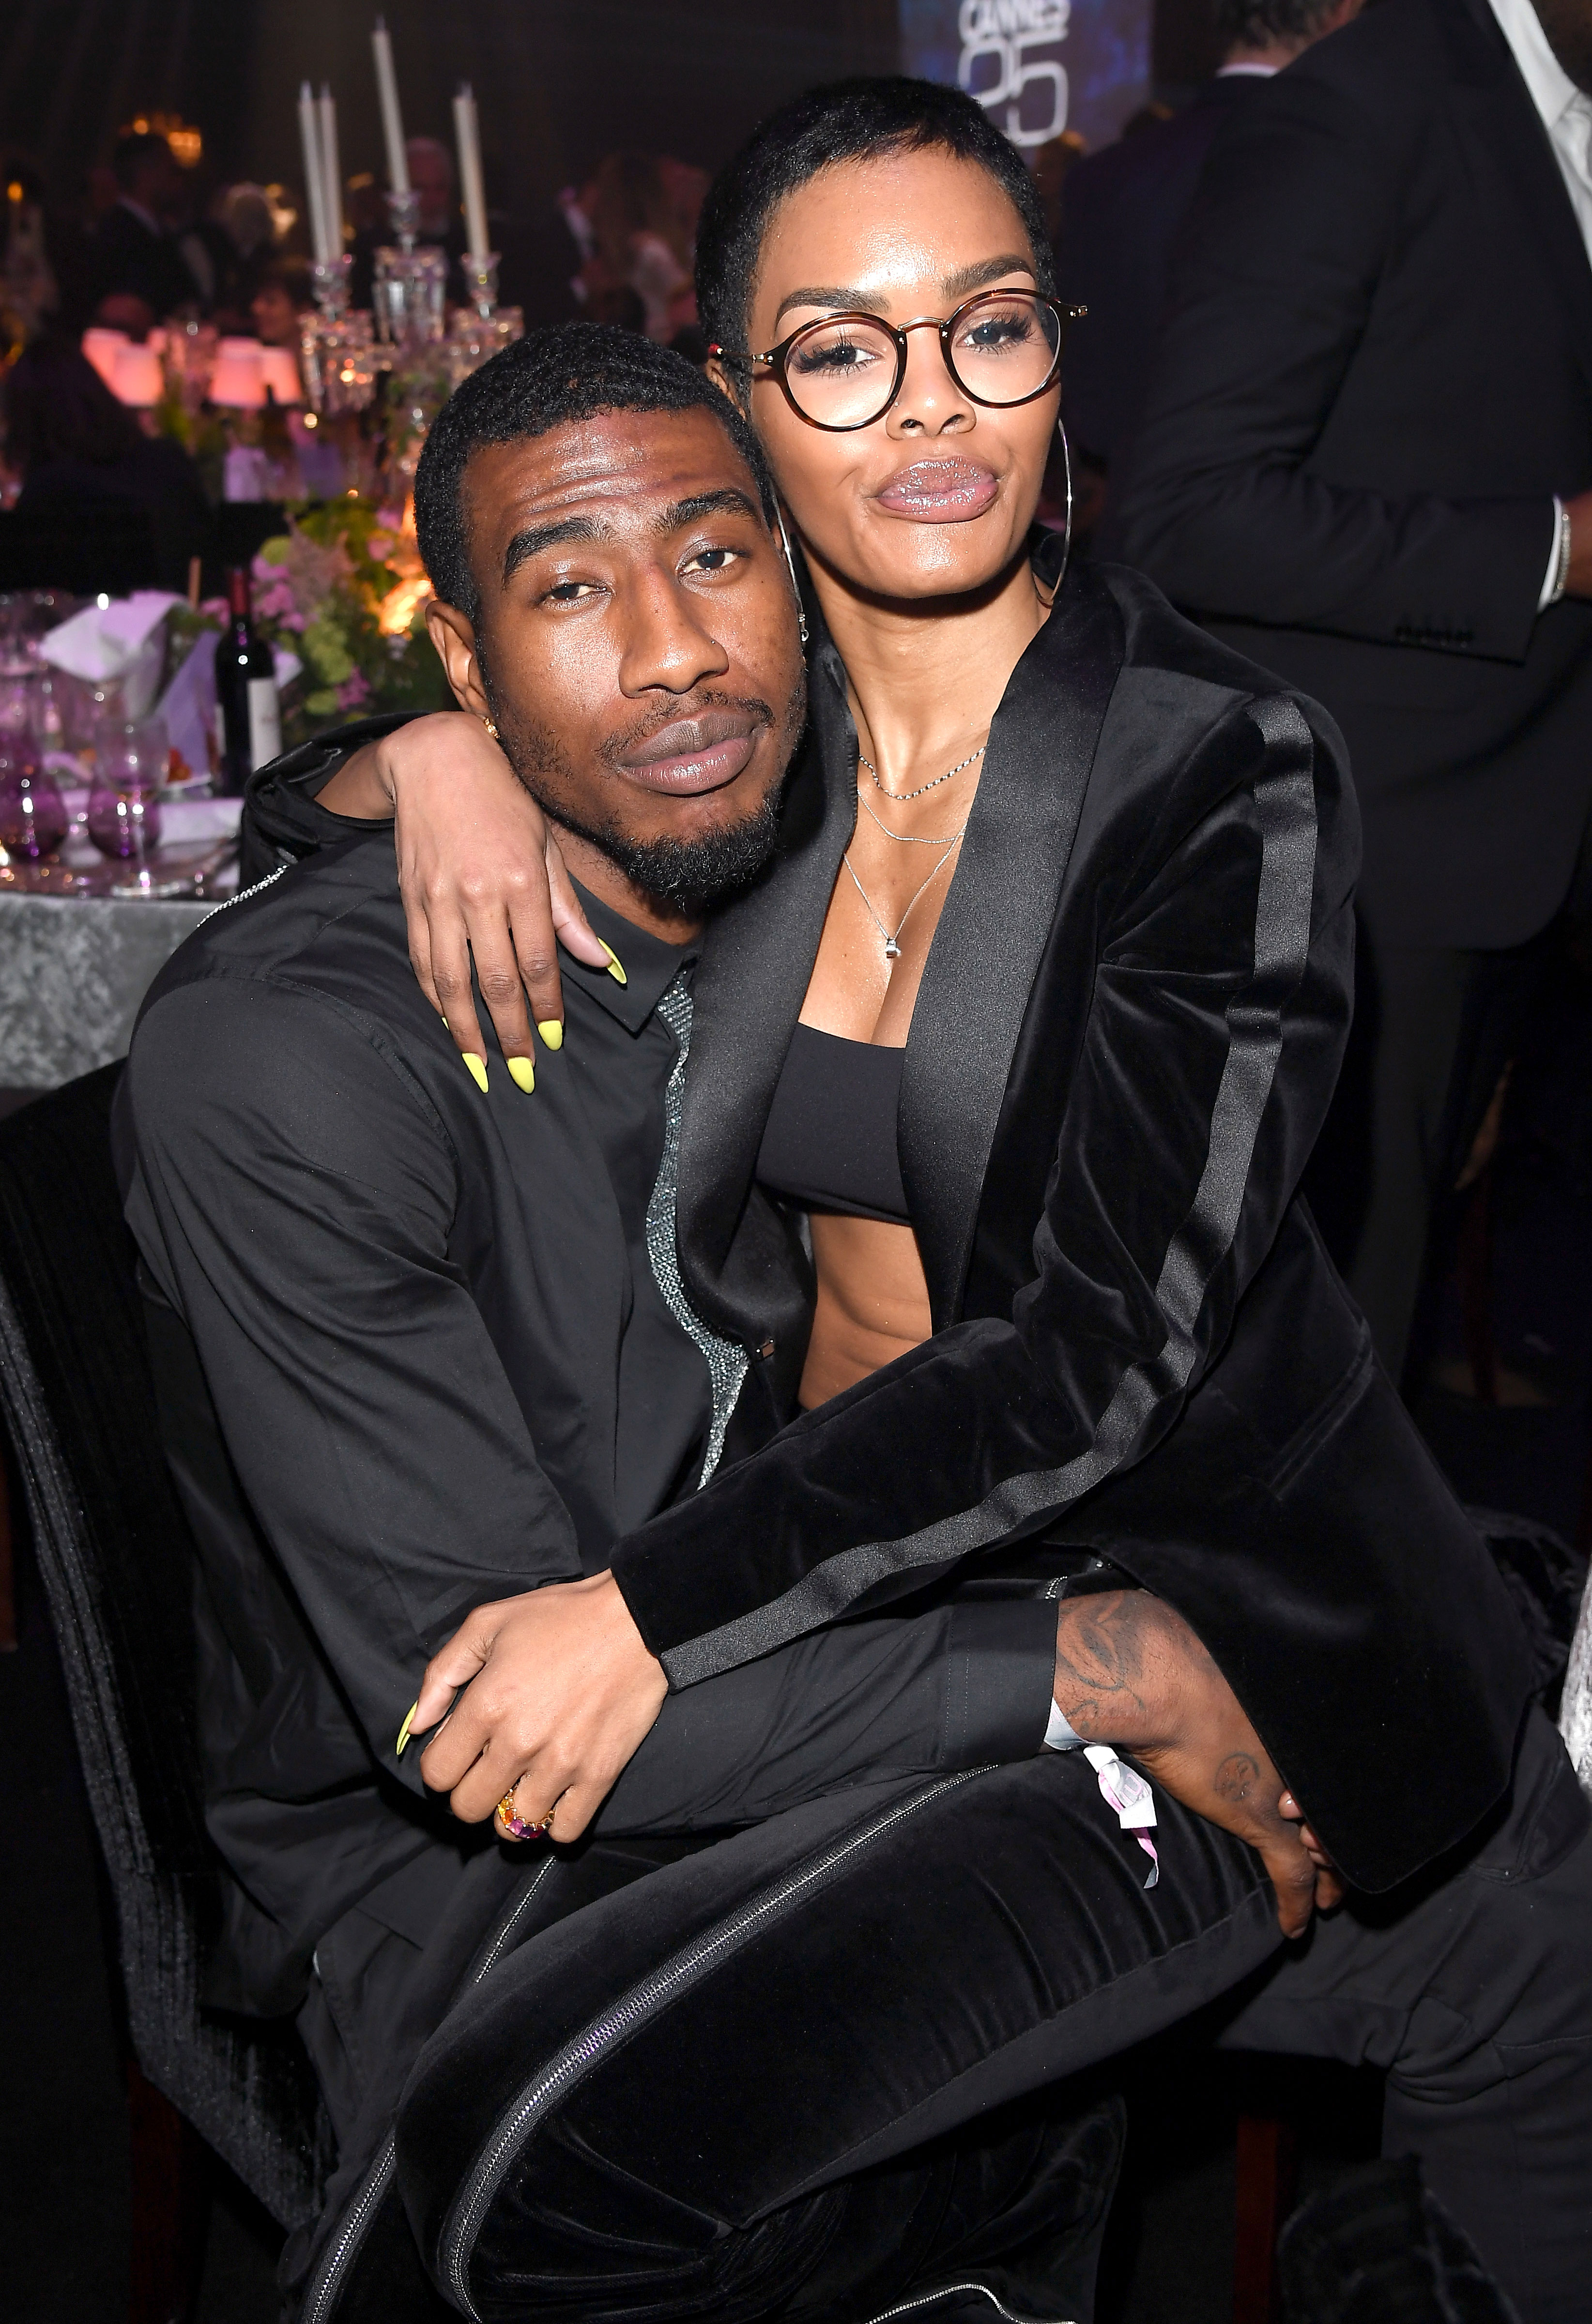 All About Teyana Taylor and Iman Shumpert's 2 Kids